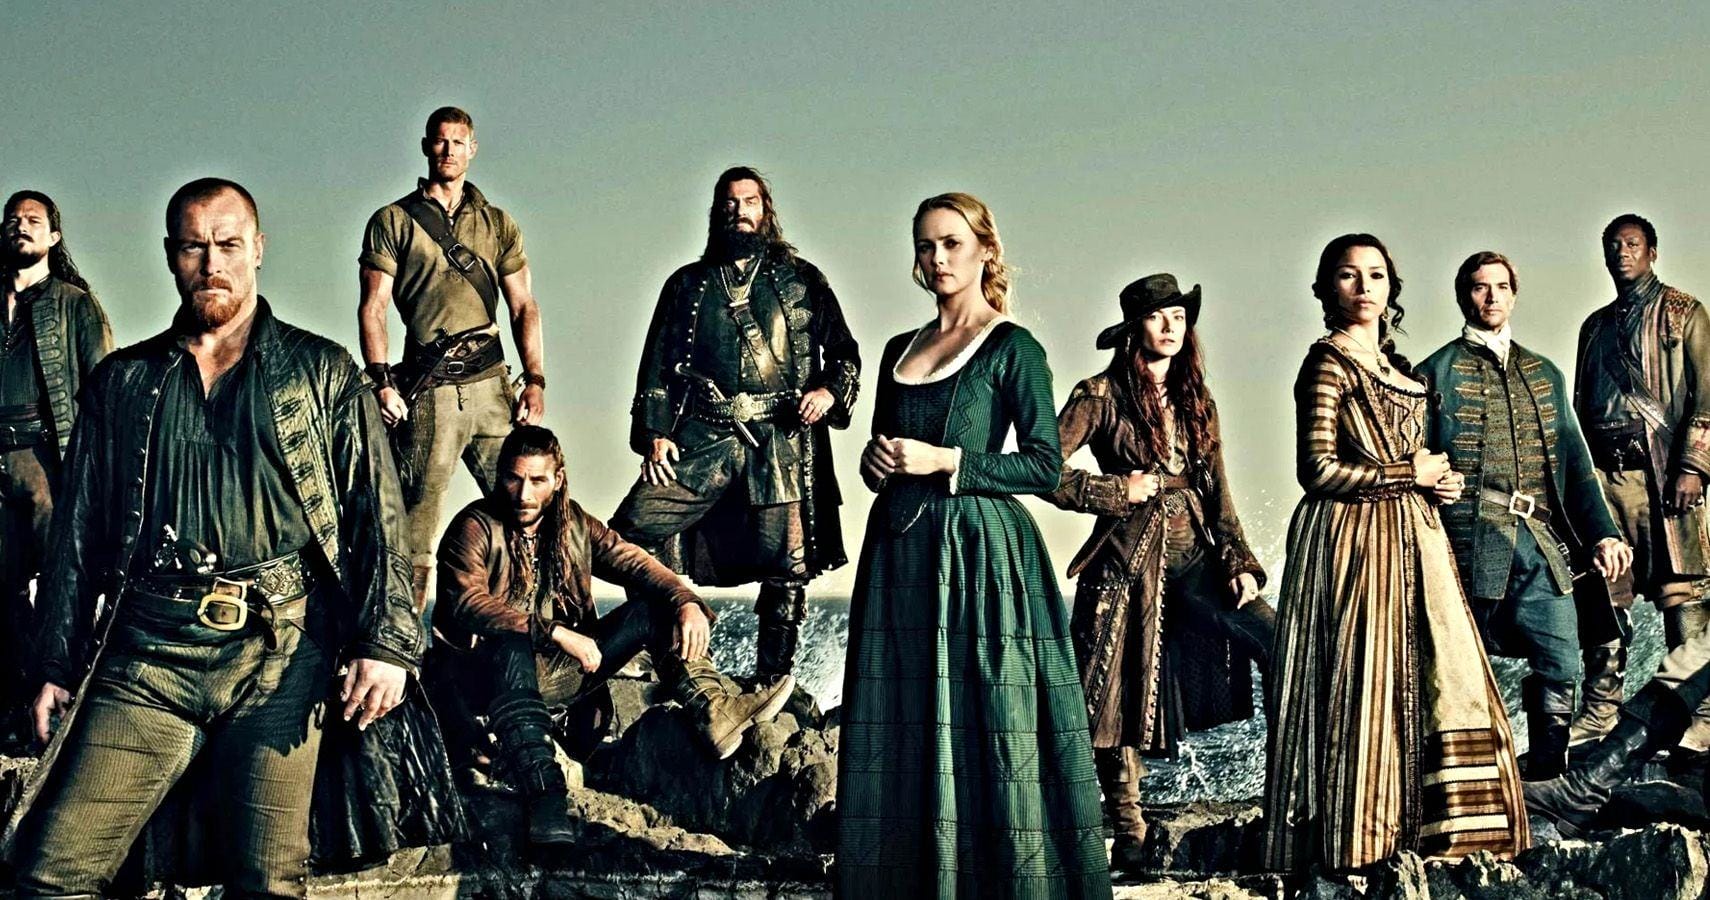 Black Sails: 10 Hidden Details About The Main Characters Everyone Missed